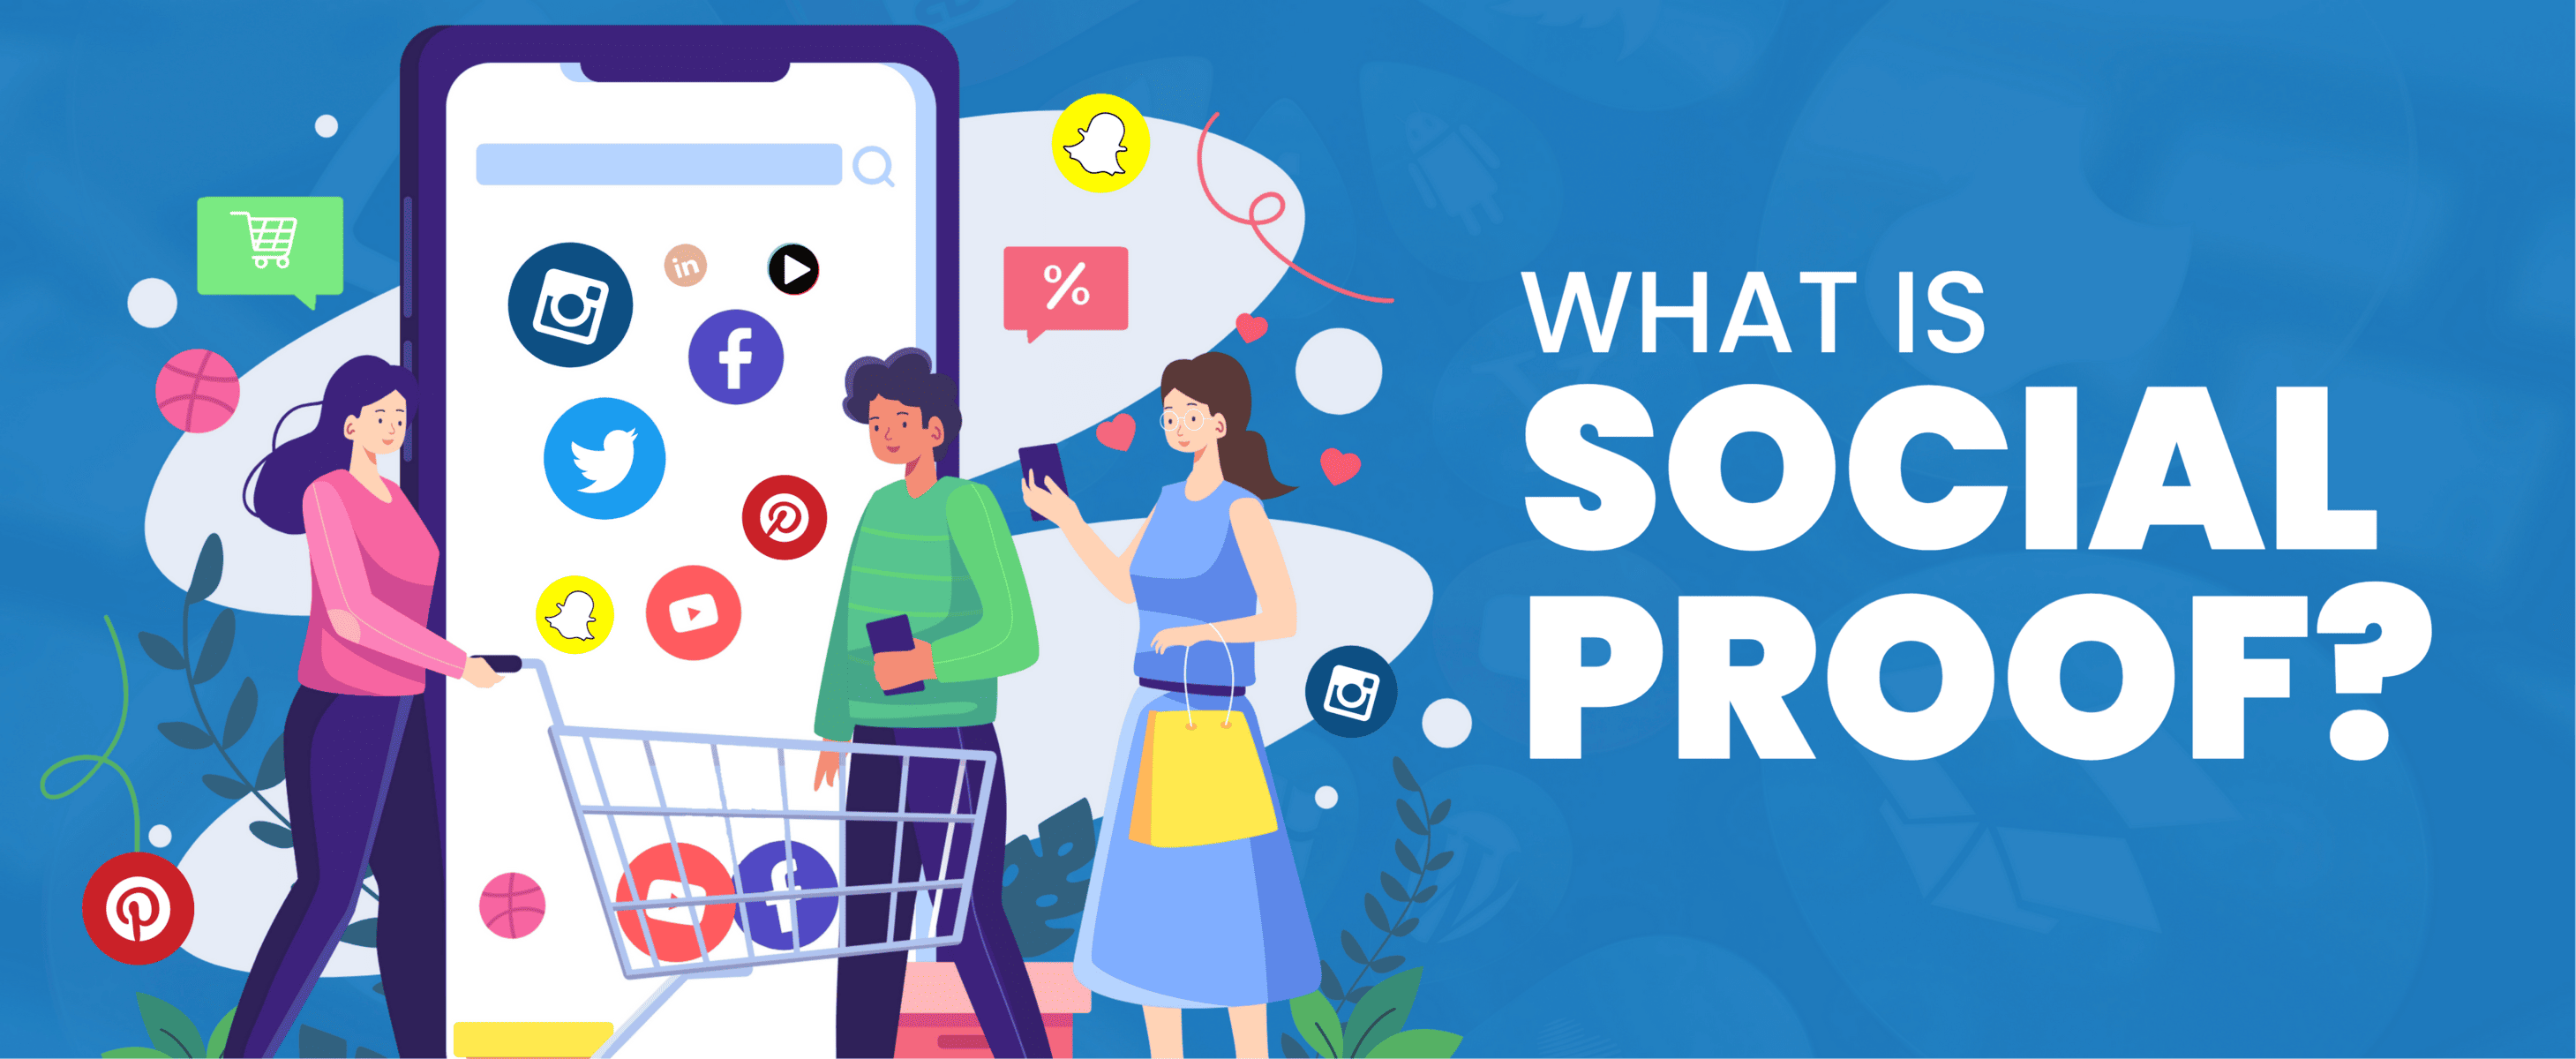 what is social proof